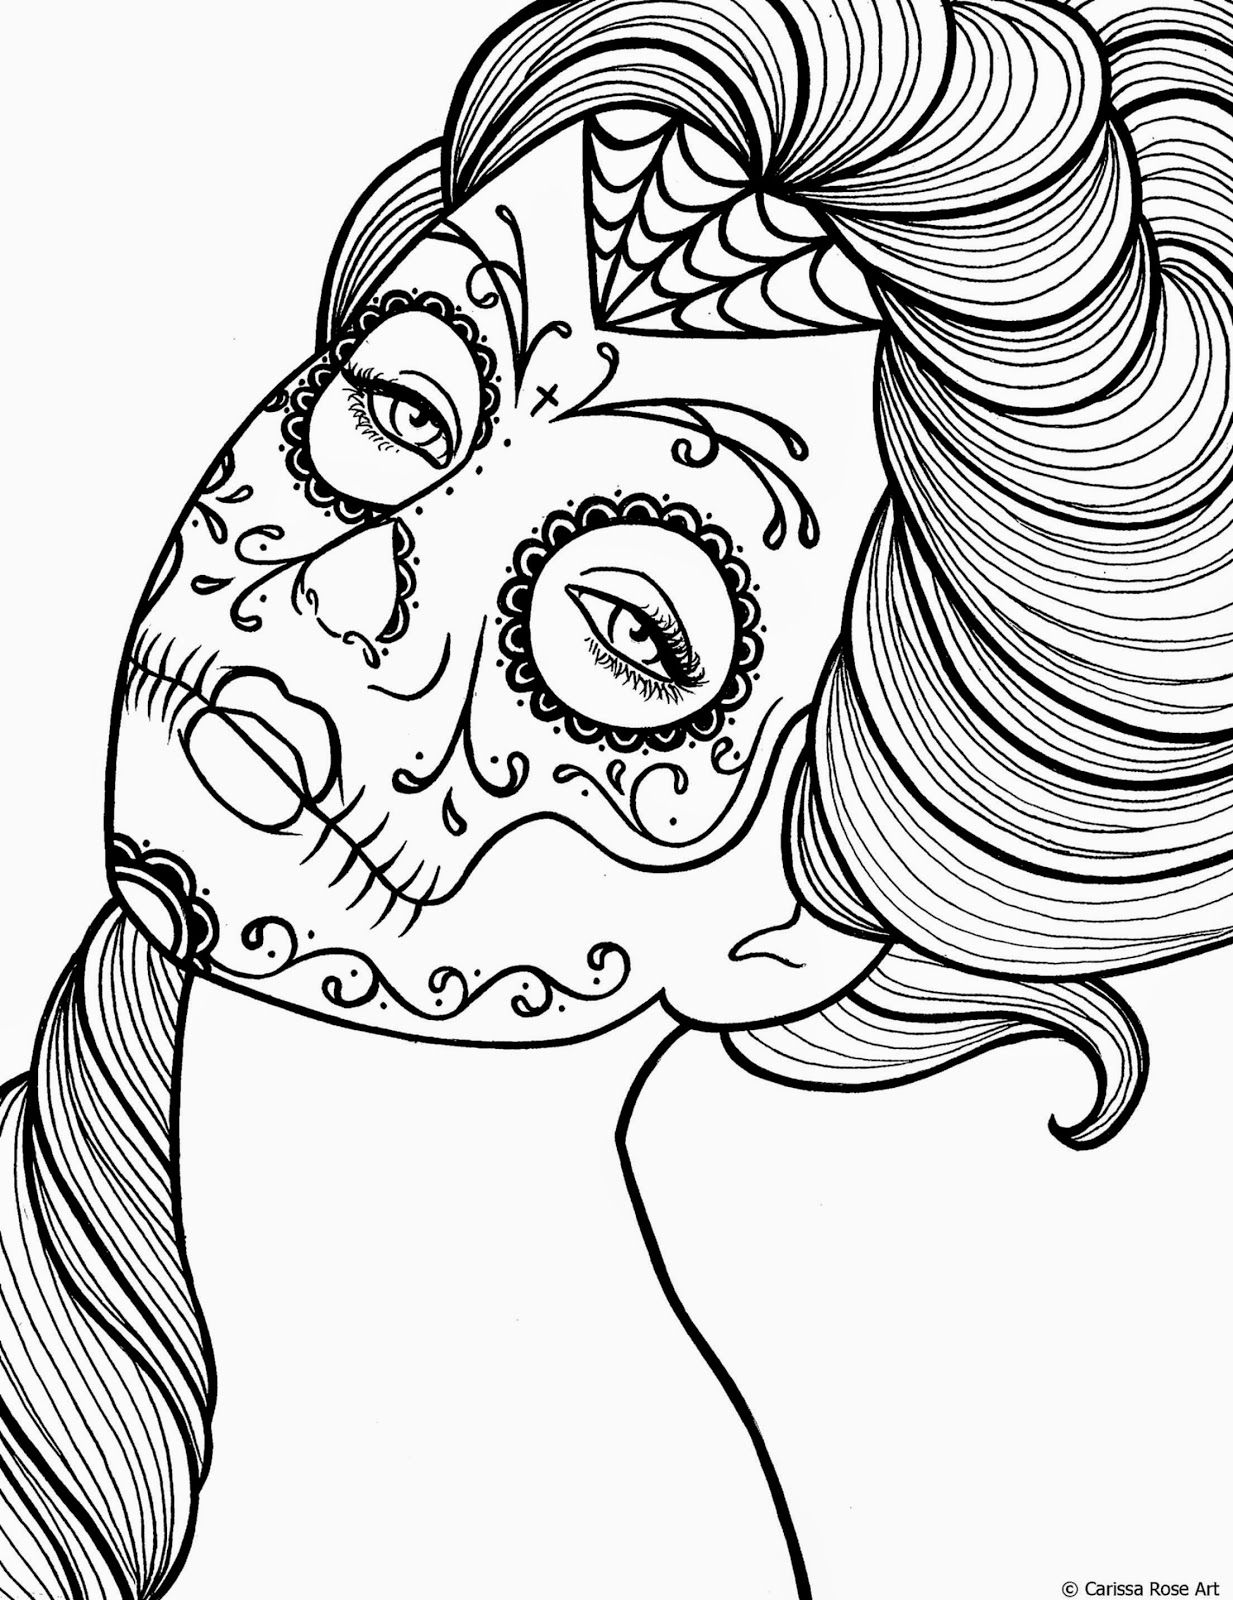 Day Of The Dead Coloring Sheets | Free Coloring Sheet